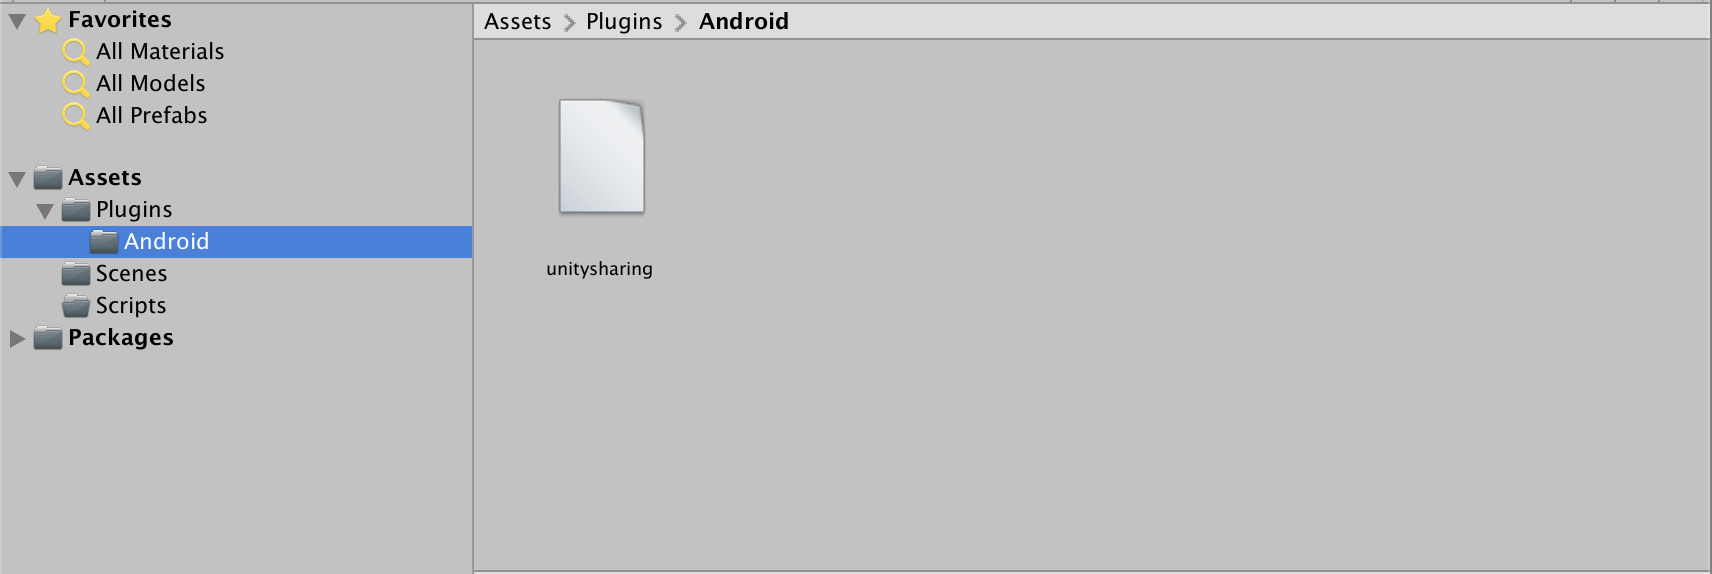 Native Android image sharing in Unity using FileProvider